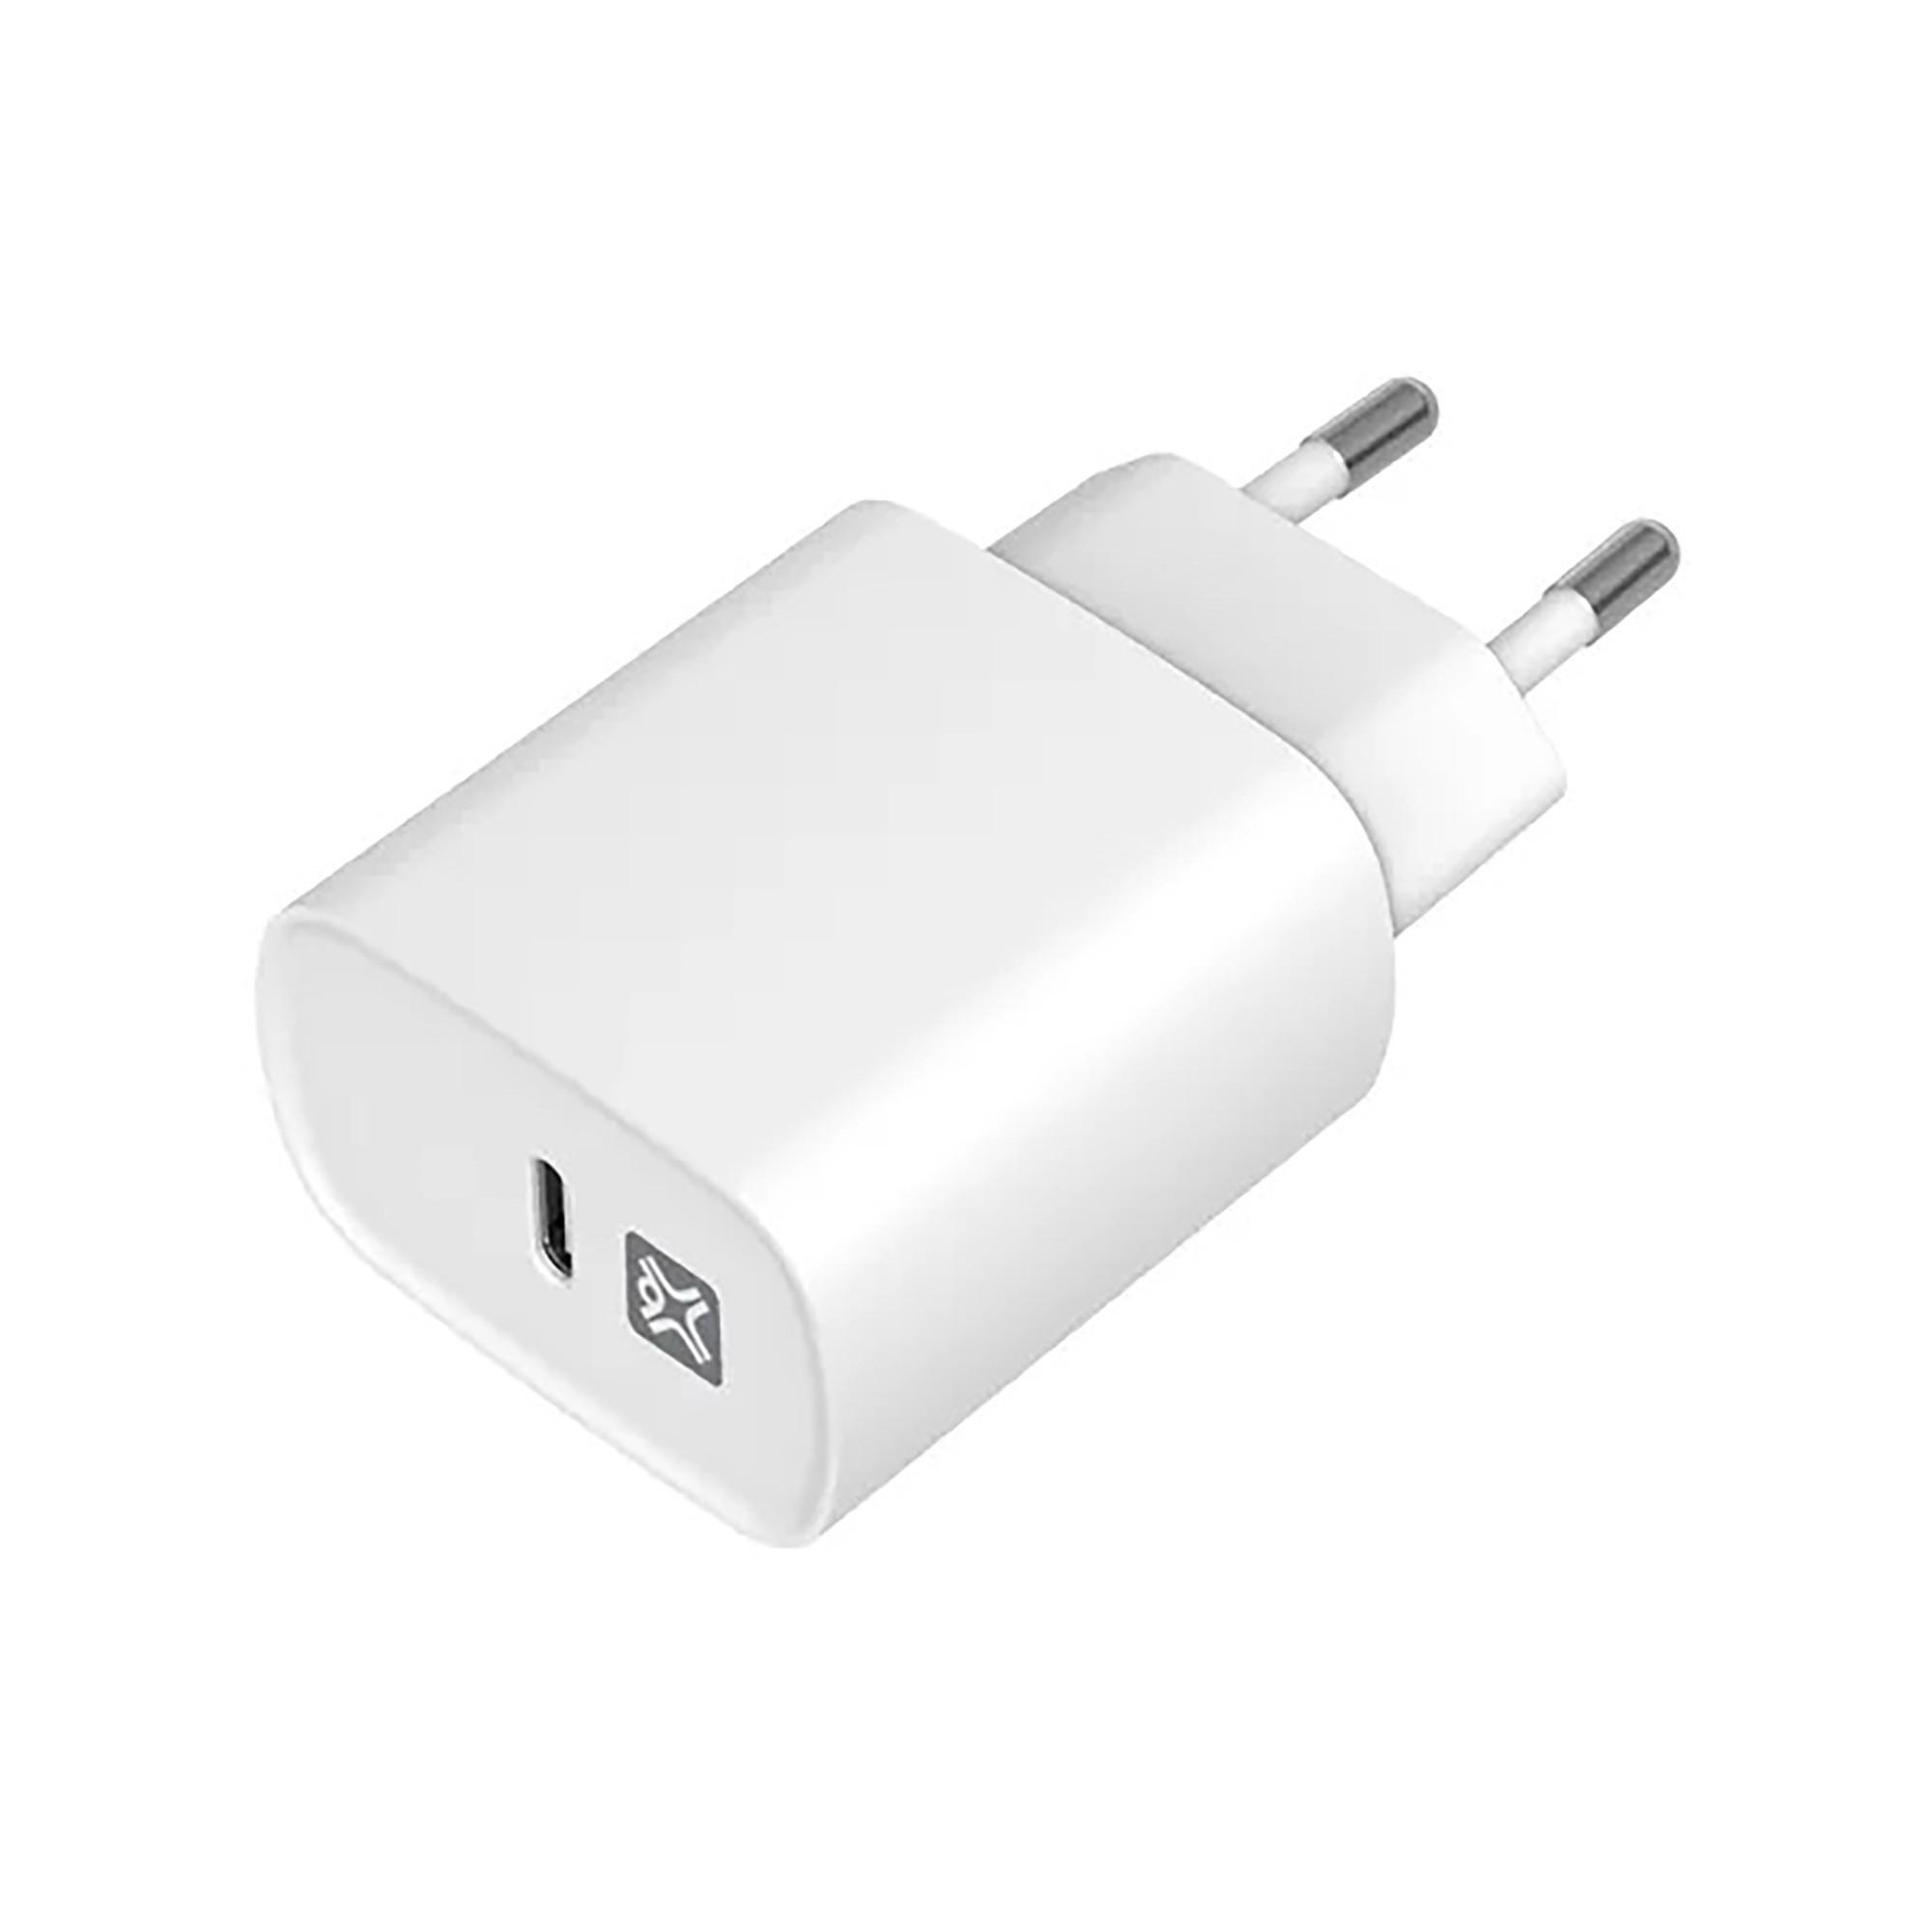 XtremeMac POWER DELIVERY USB-C 20W WALL CHARGER Chargeur USB
 